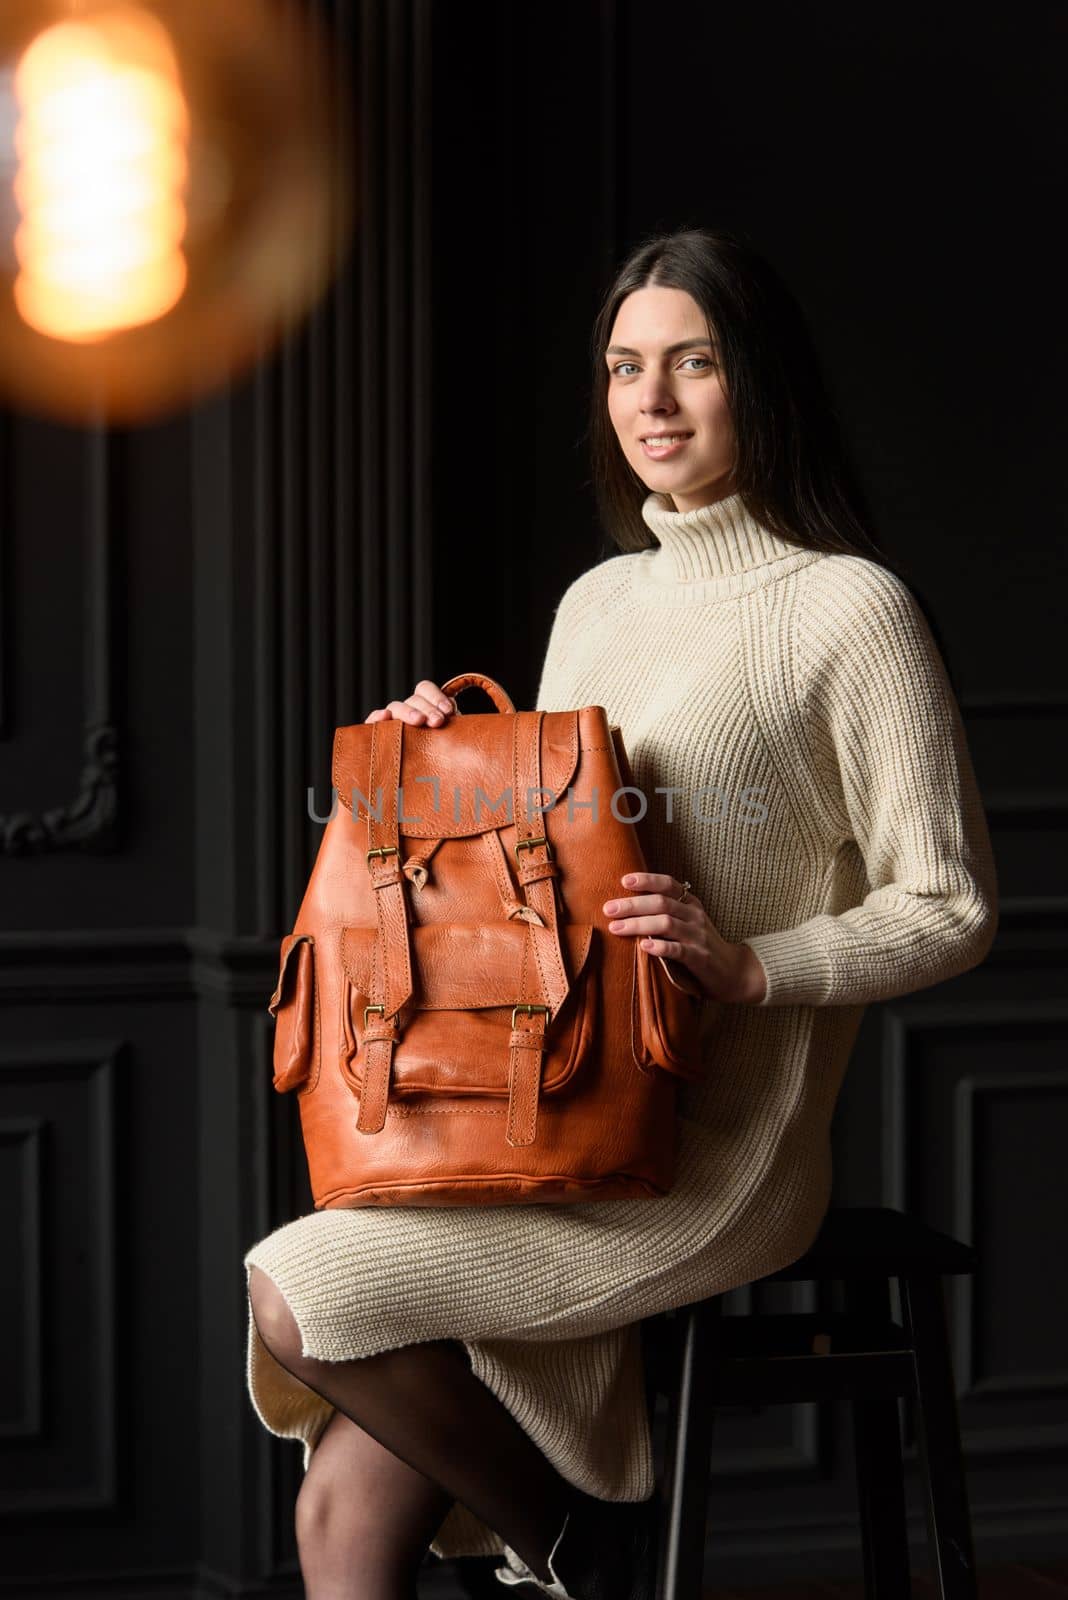 photo of a woman with a orange leather backpack with antique and retro look. indoors photo by Ashtray25